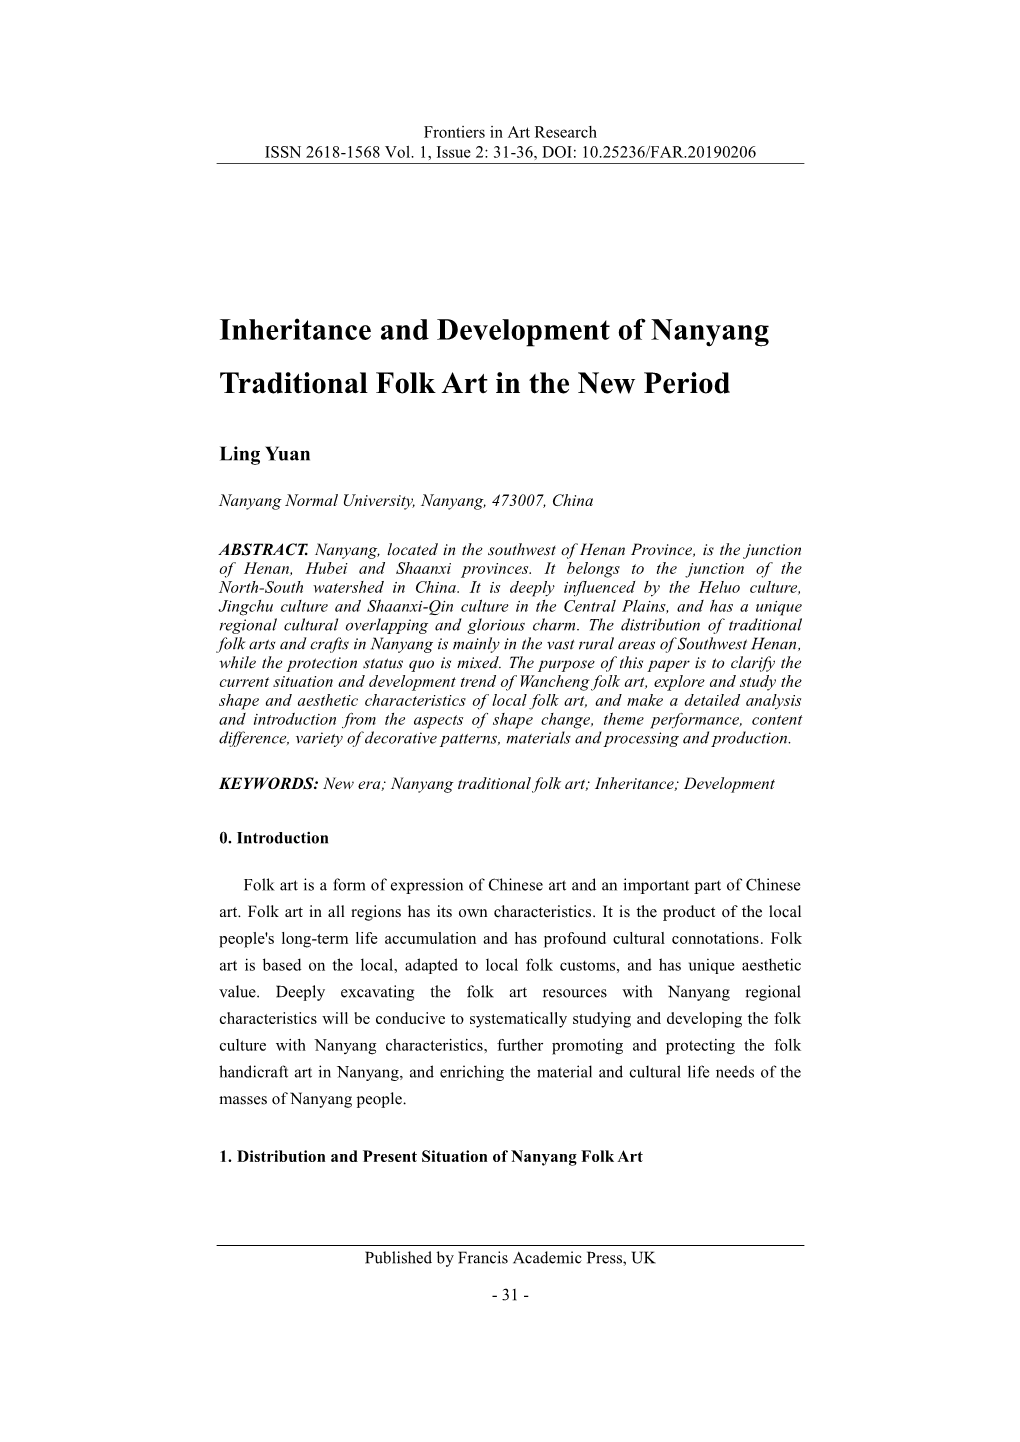 Inheritance and Development of Nanyang Traditional Folk Art in the New Period